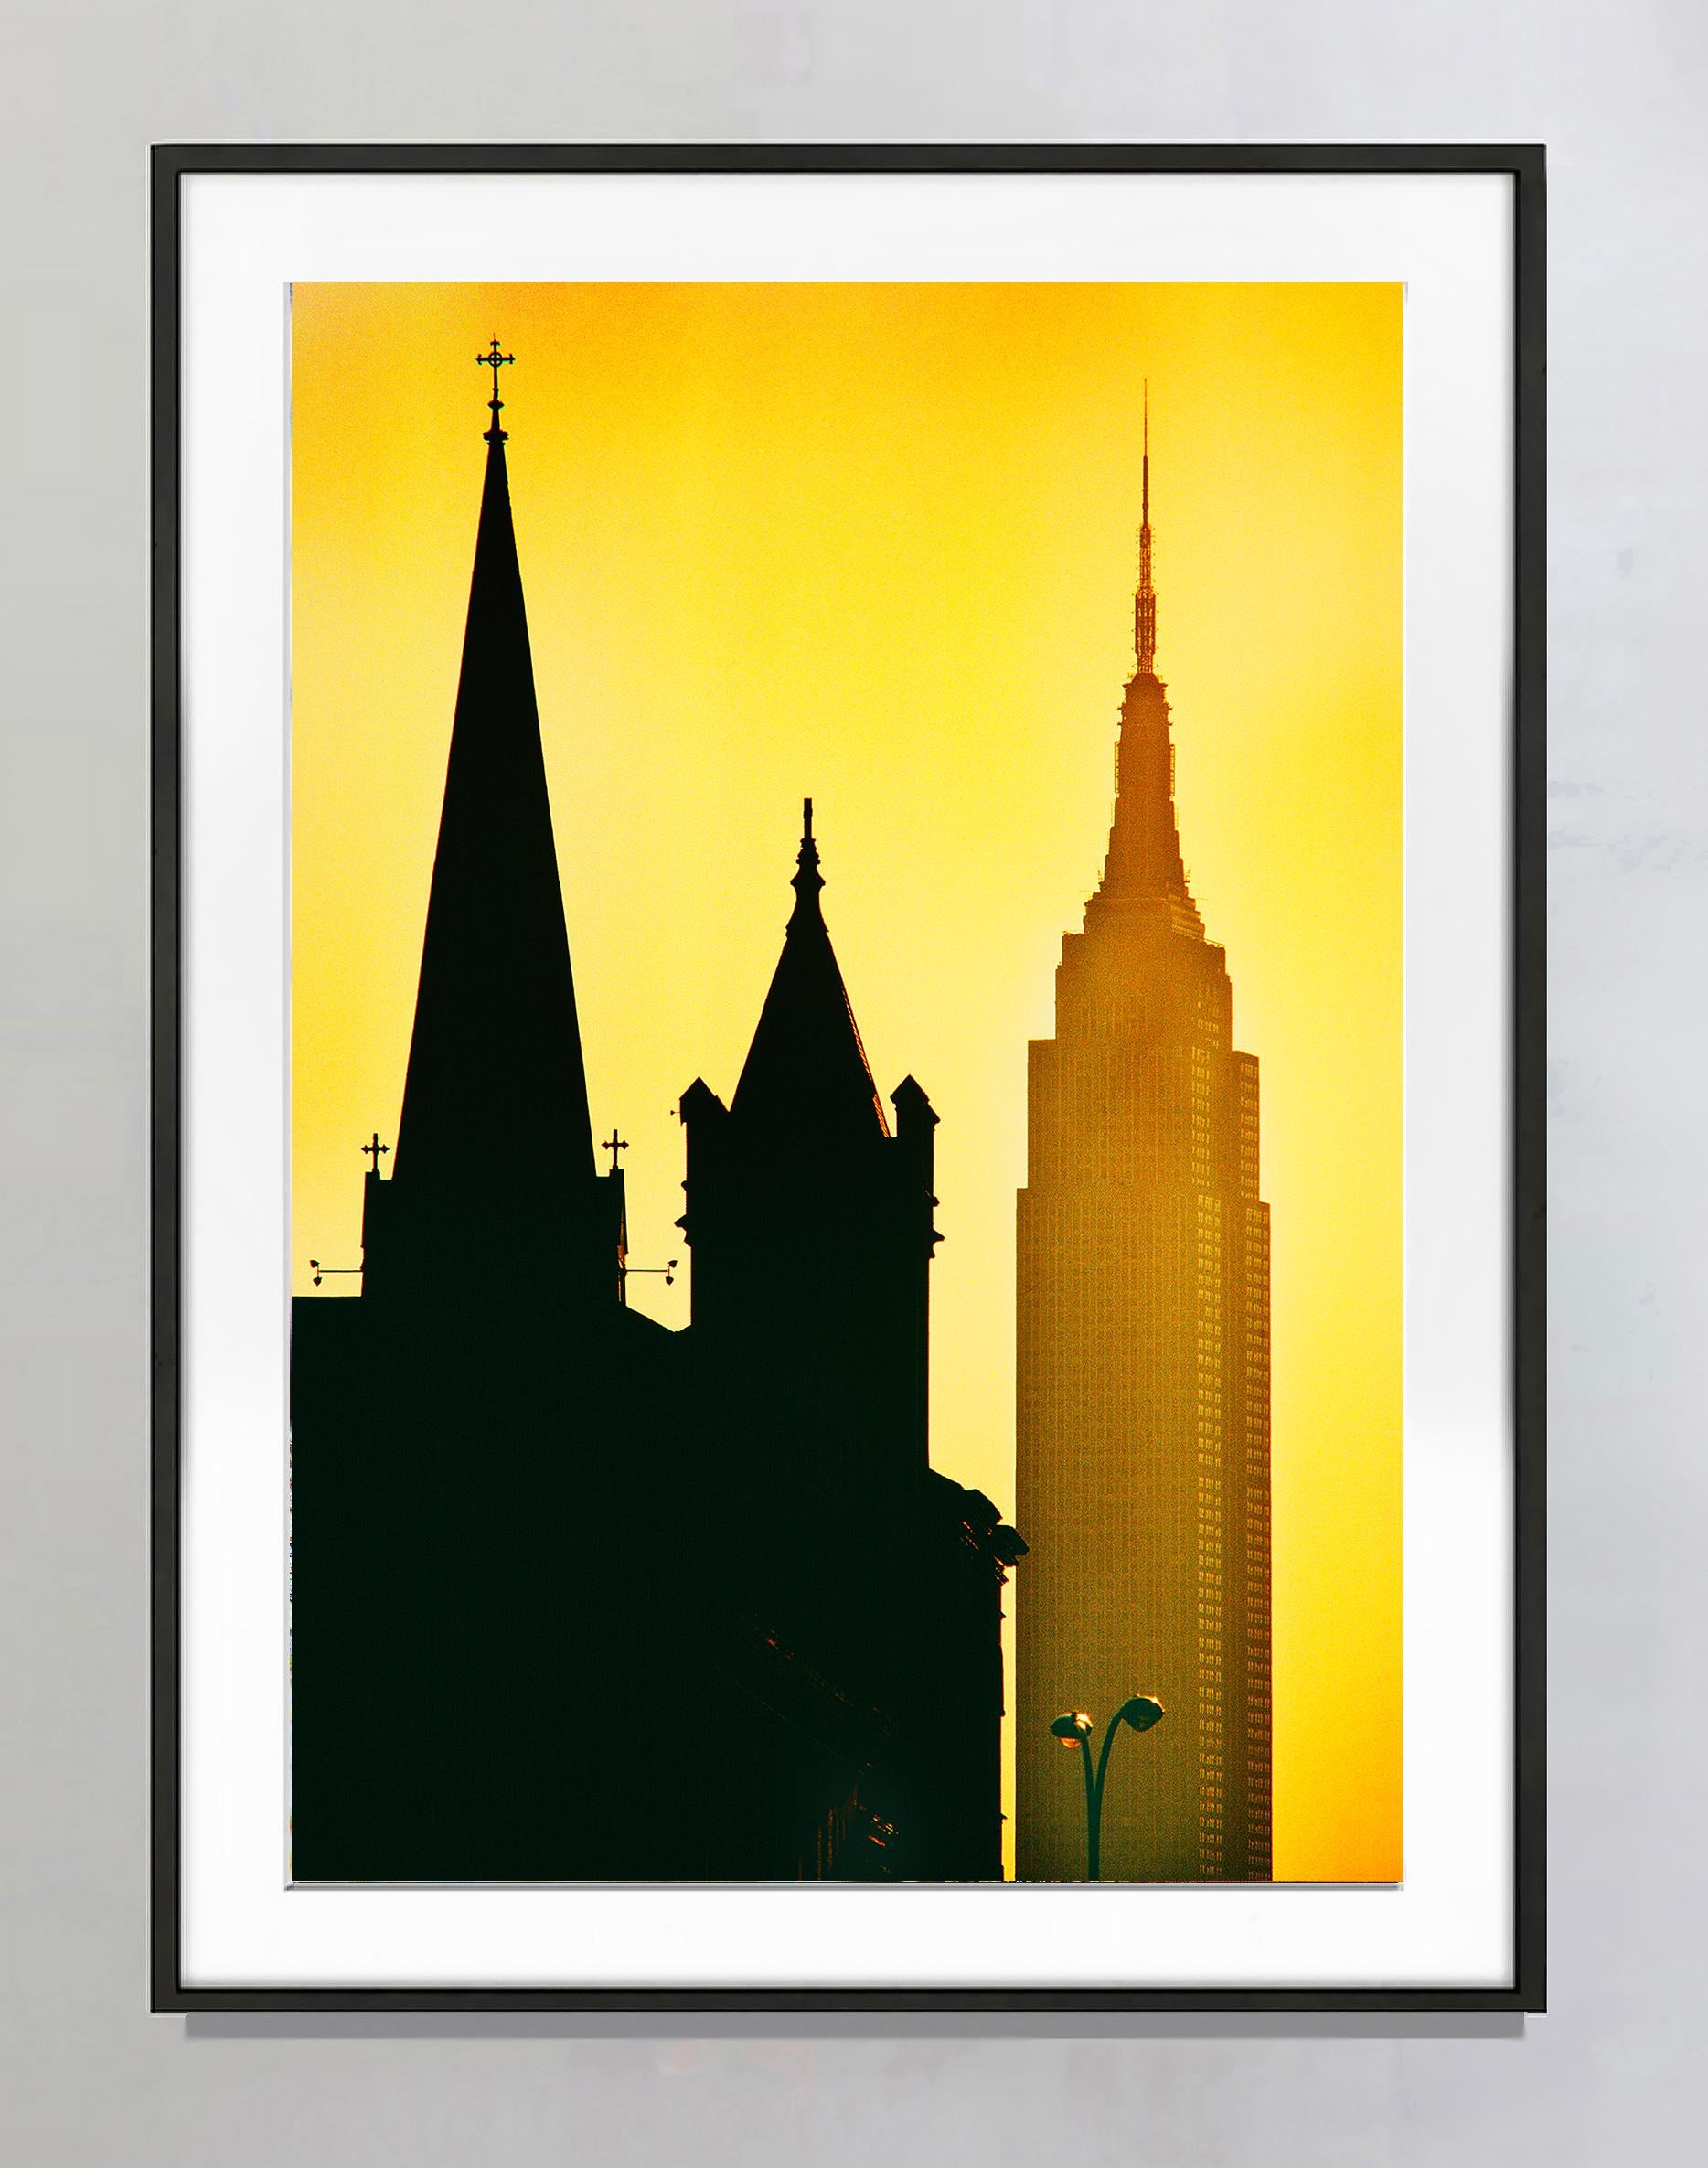 Inspiring Spires: Empire State Building in New York City at Gold Sunset - Photograph by Mitchell Funk